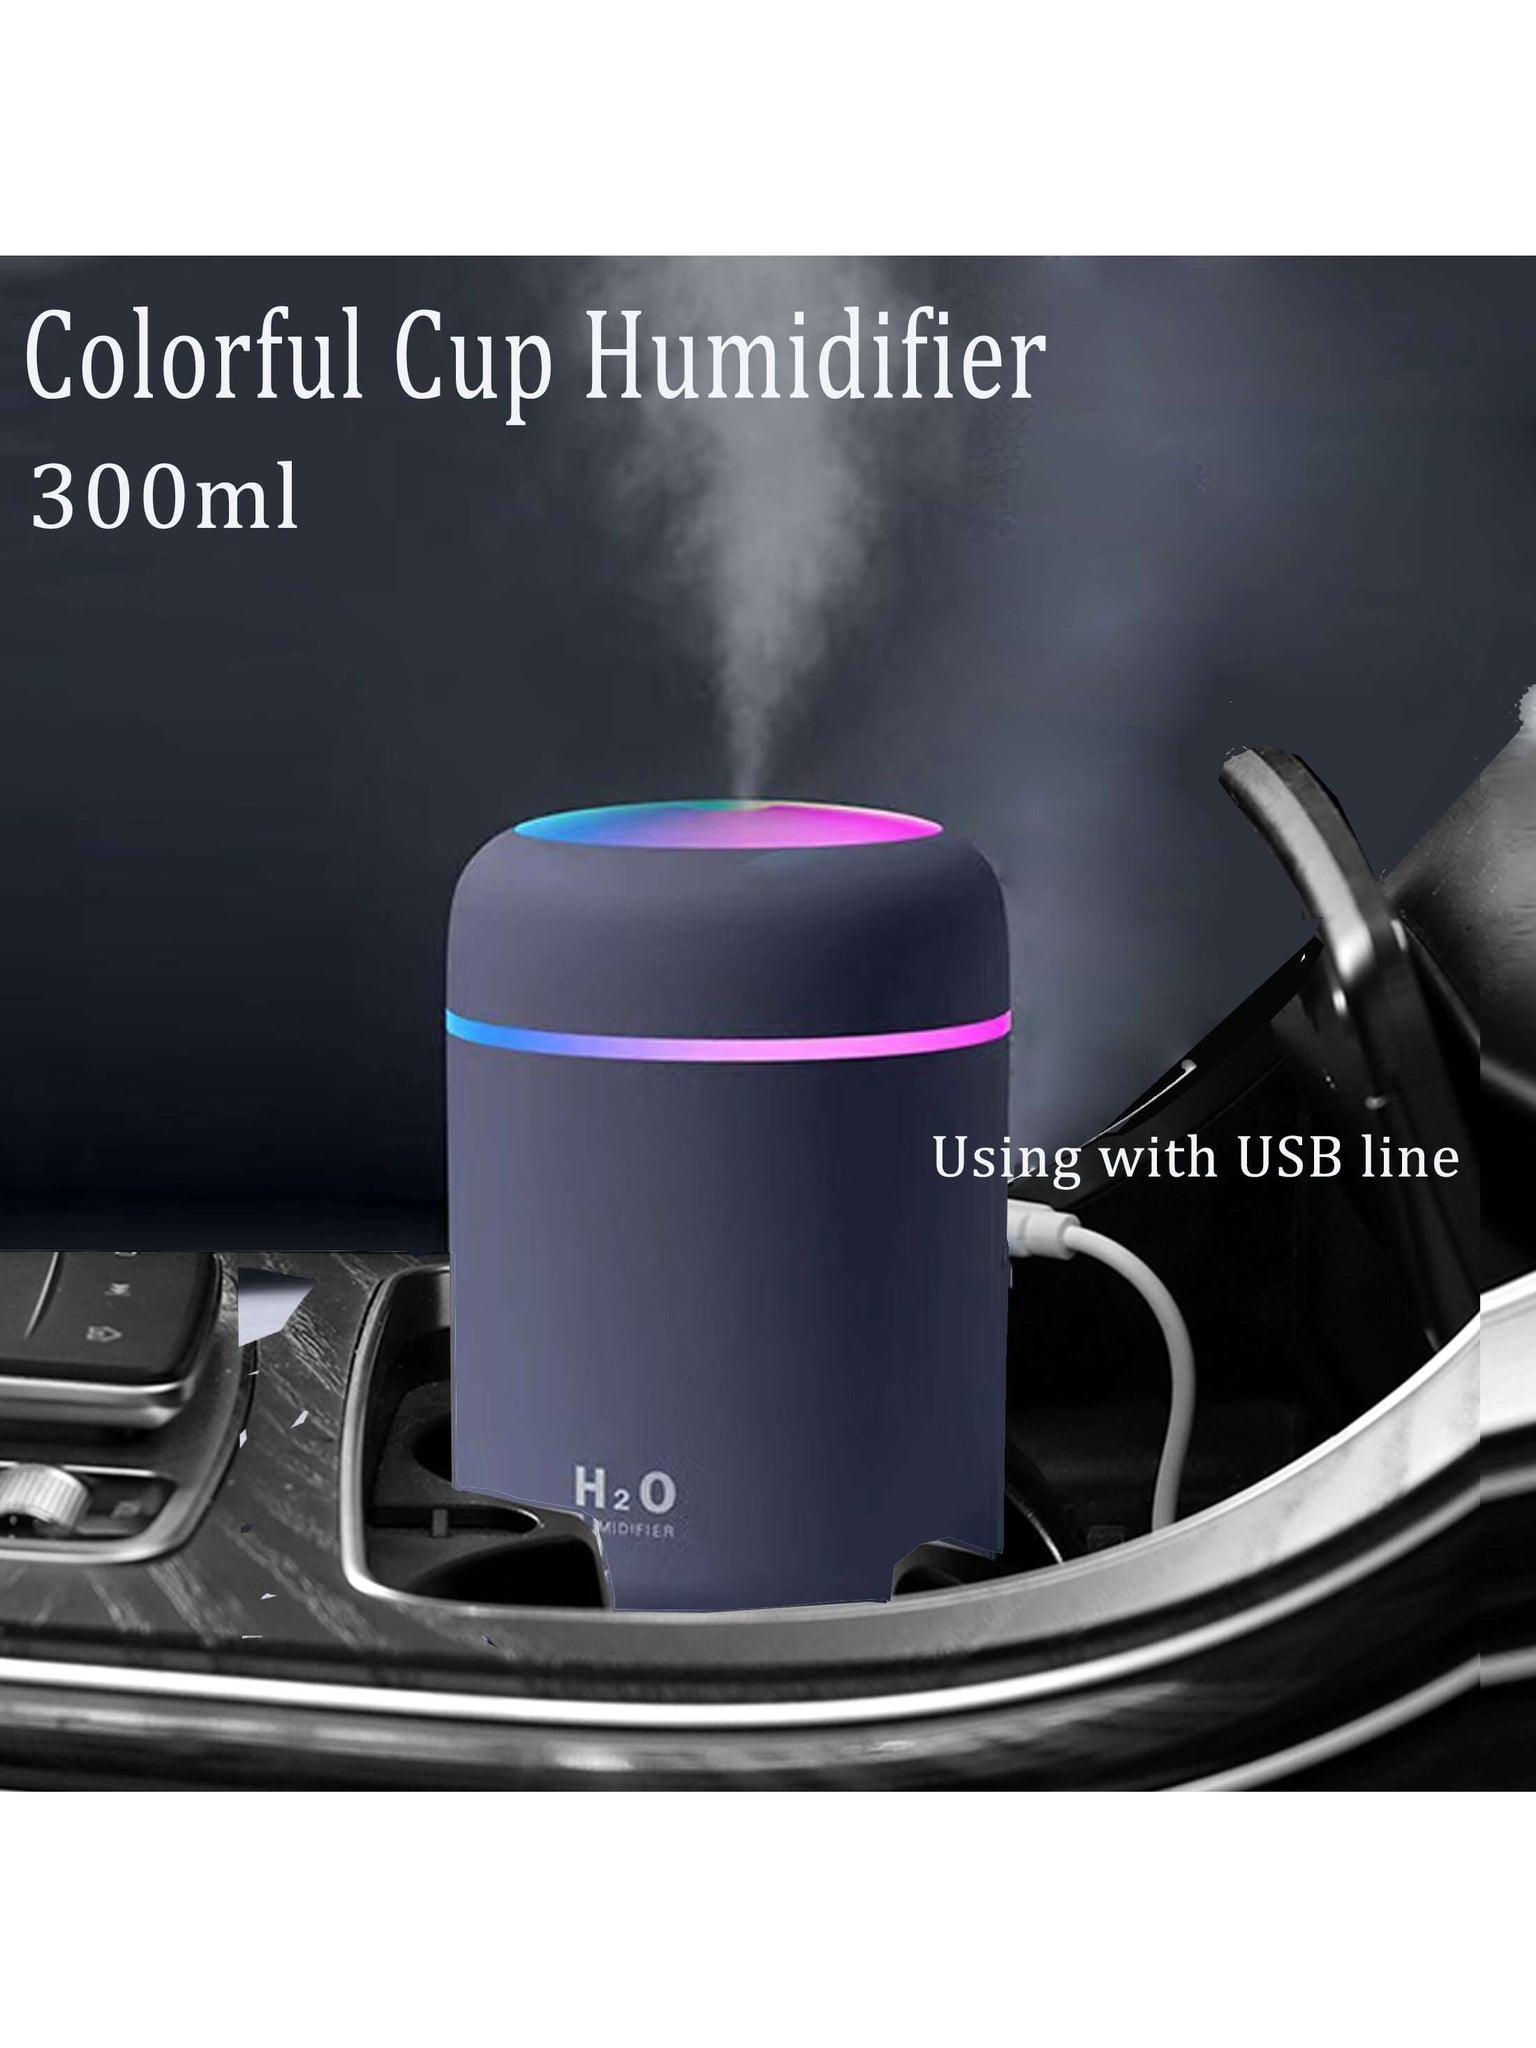 1pc Usb Powered 2w 300ml Car-mounted Colorful Humidifier With Data Cable And 7-color Atmosphere Light, Suitable For Car And Room Air Purifying And Moisturizing, Office And Bedroom Use-Navy Blue-2